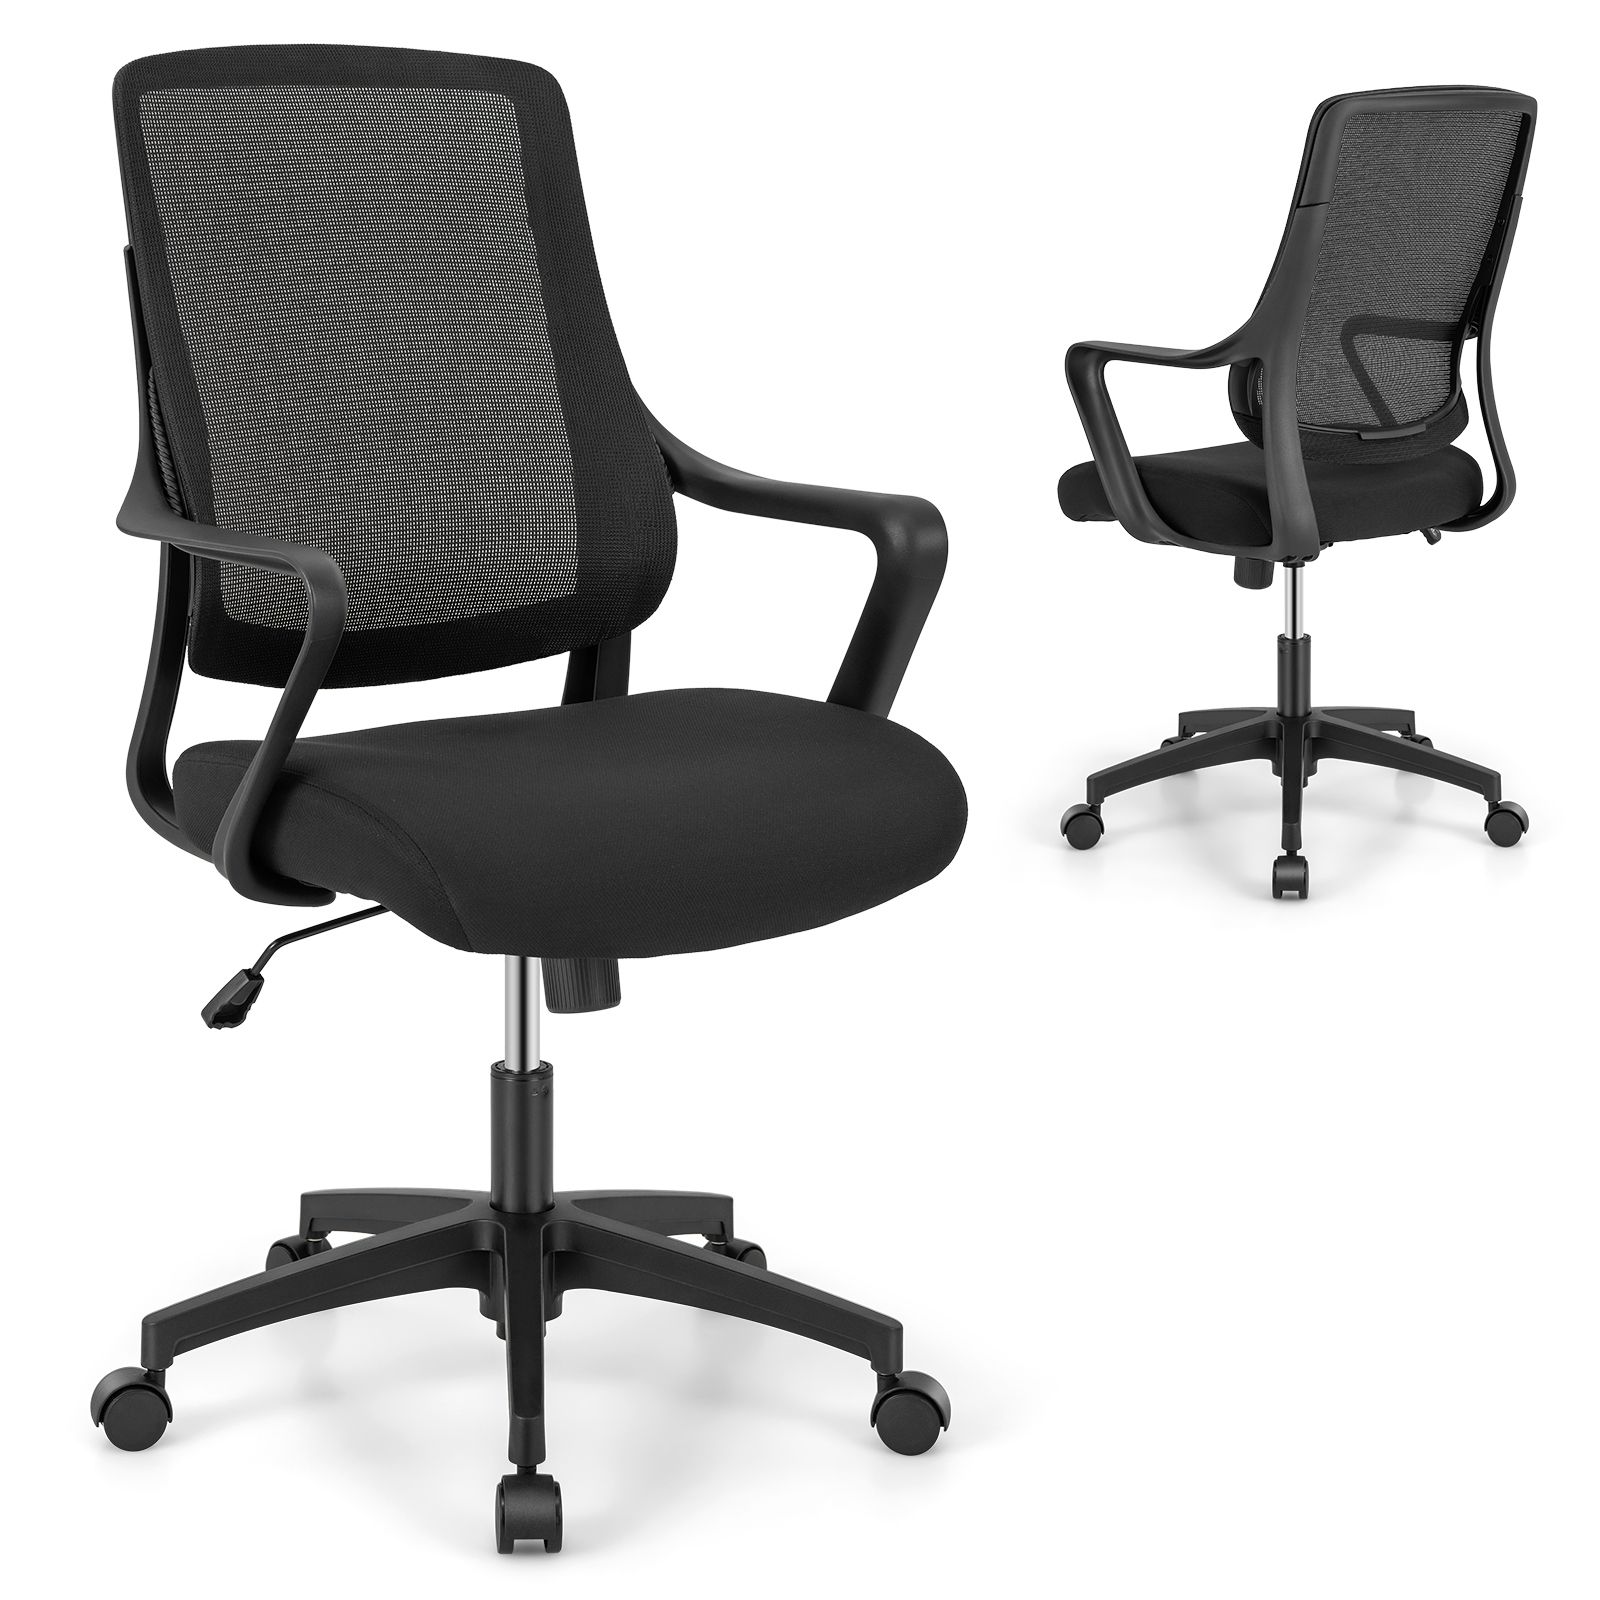 Ergonomic Office Chair with Wheels